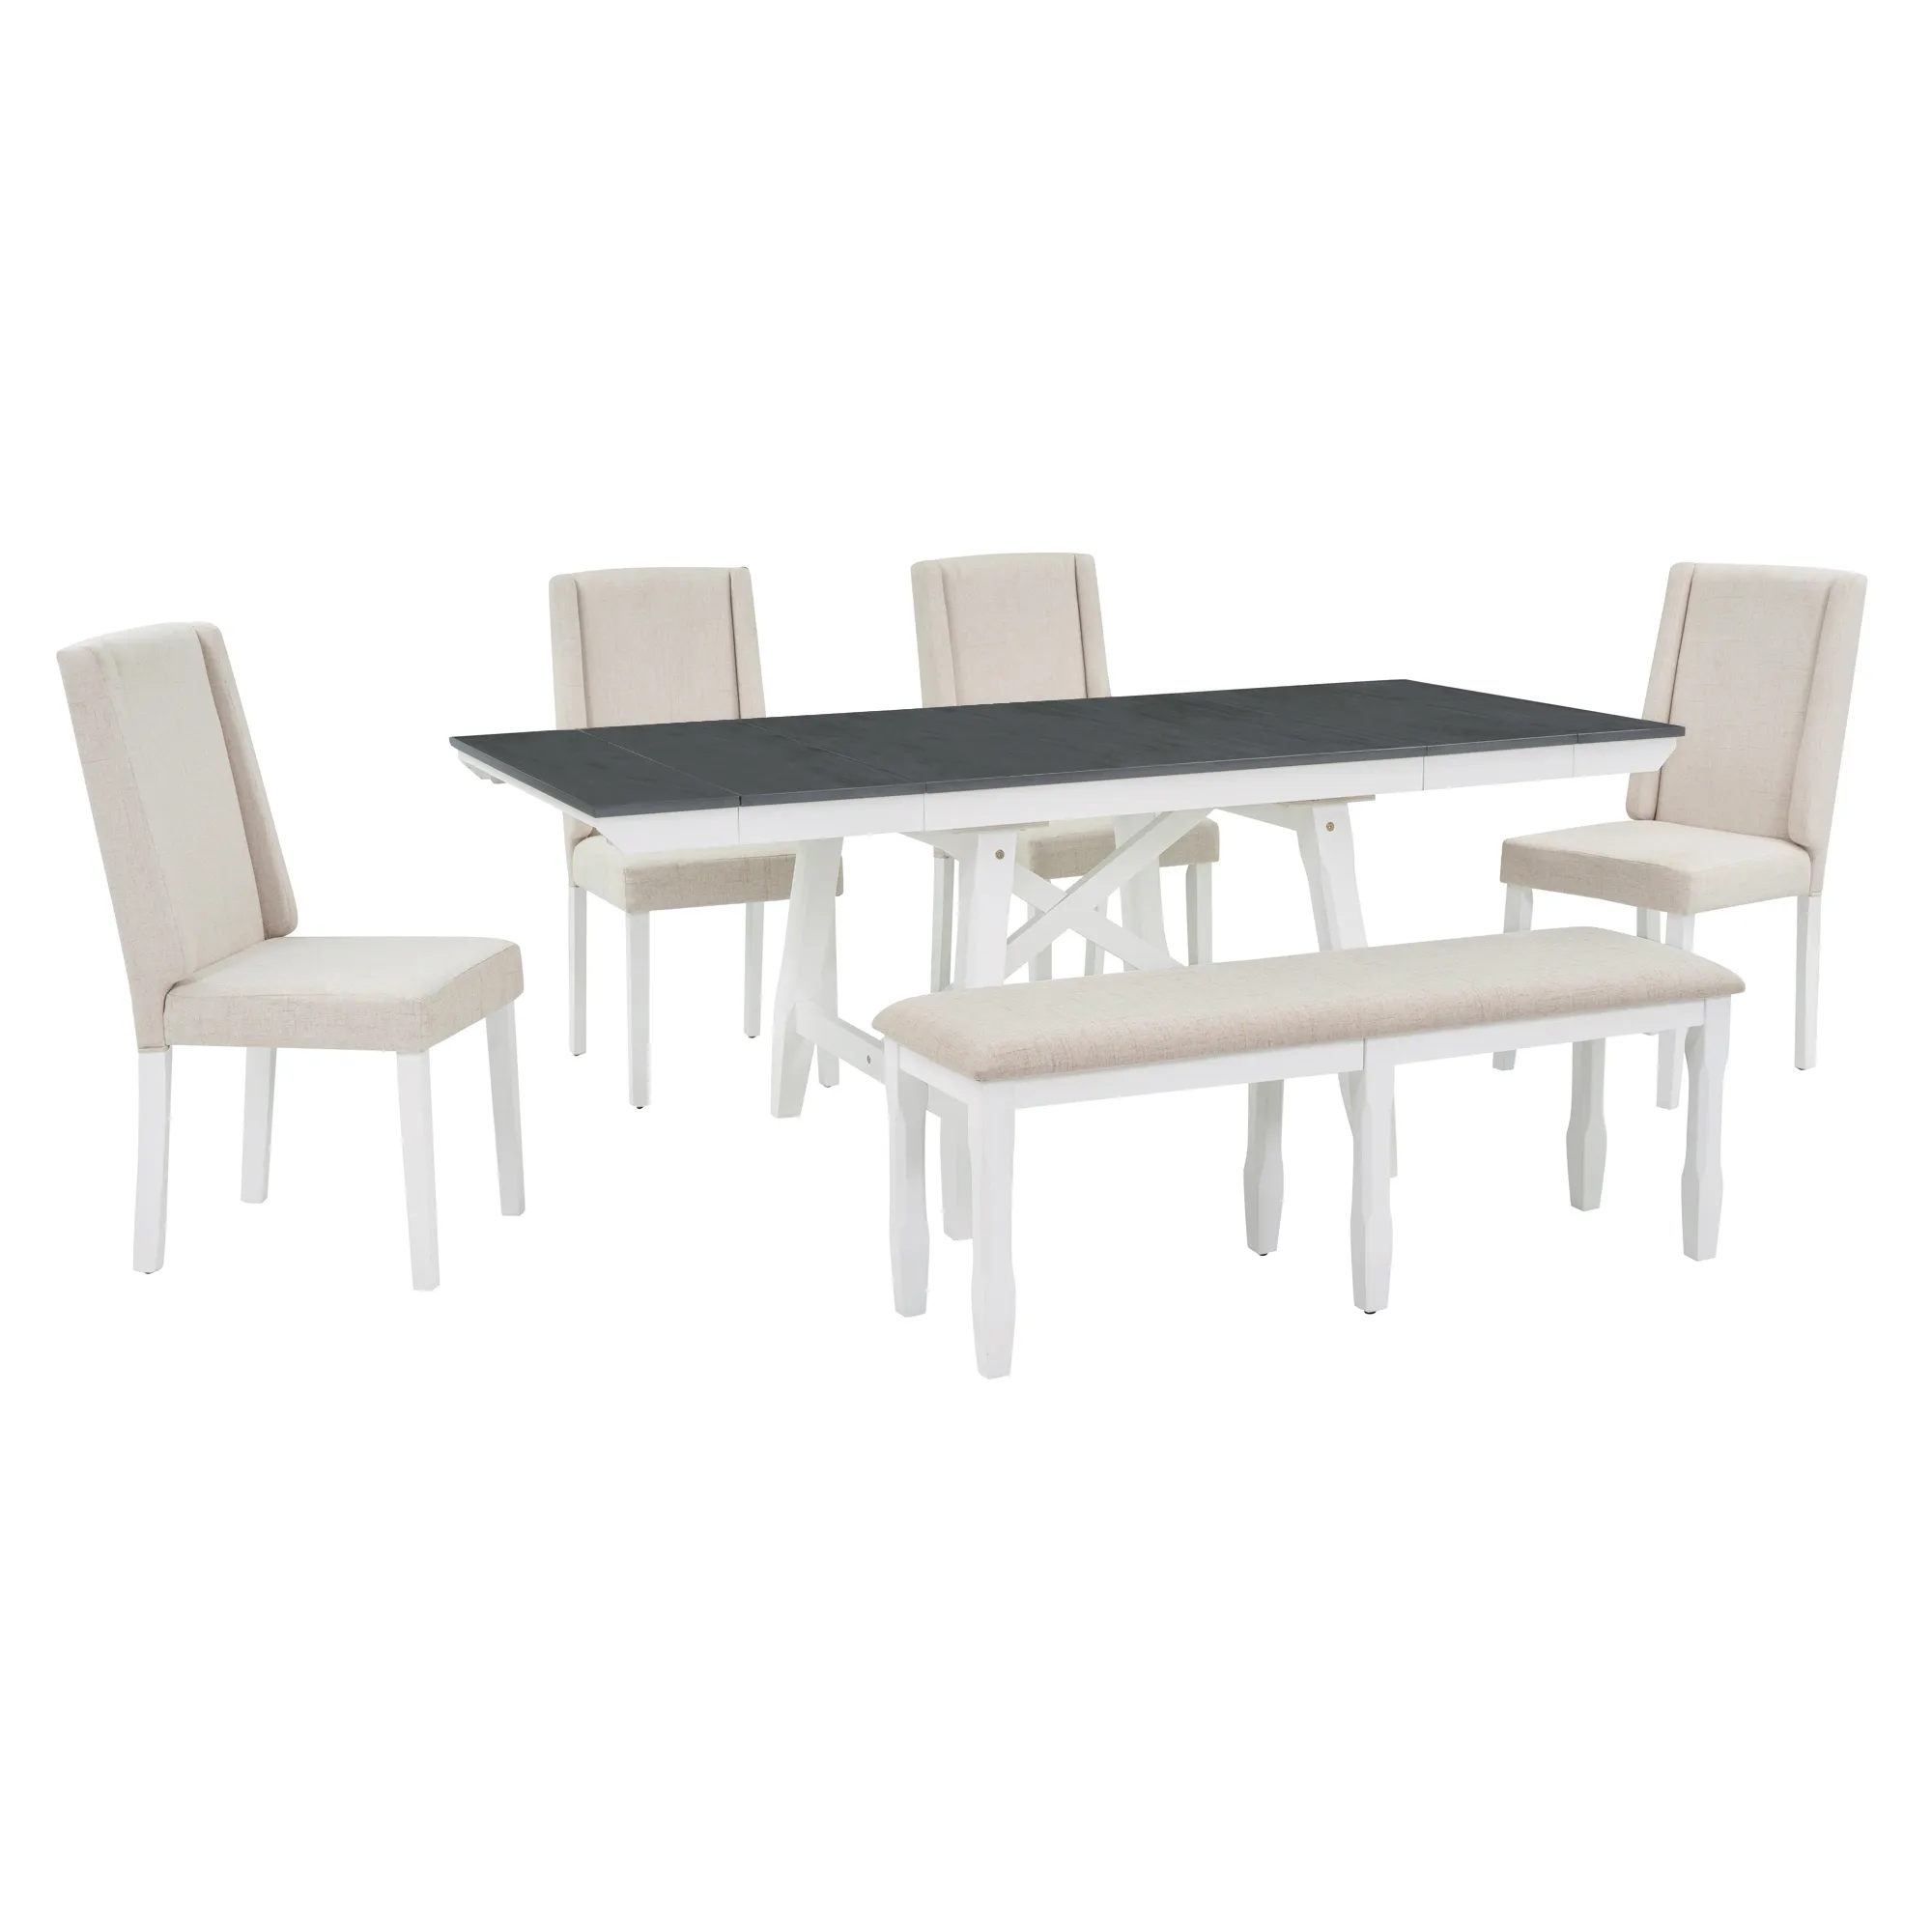 Merax 6-Piece Classic Dining Table Set of 4 Chairs and 1 Bench